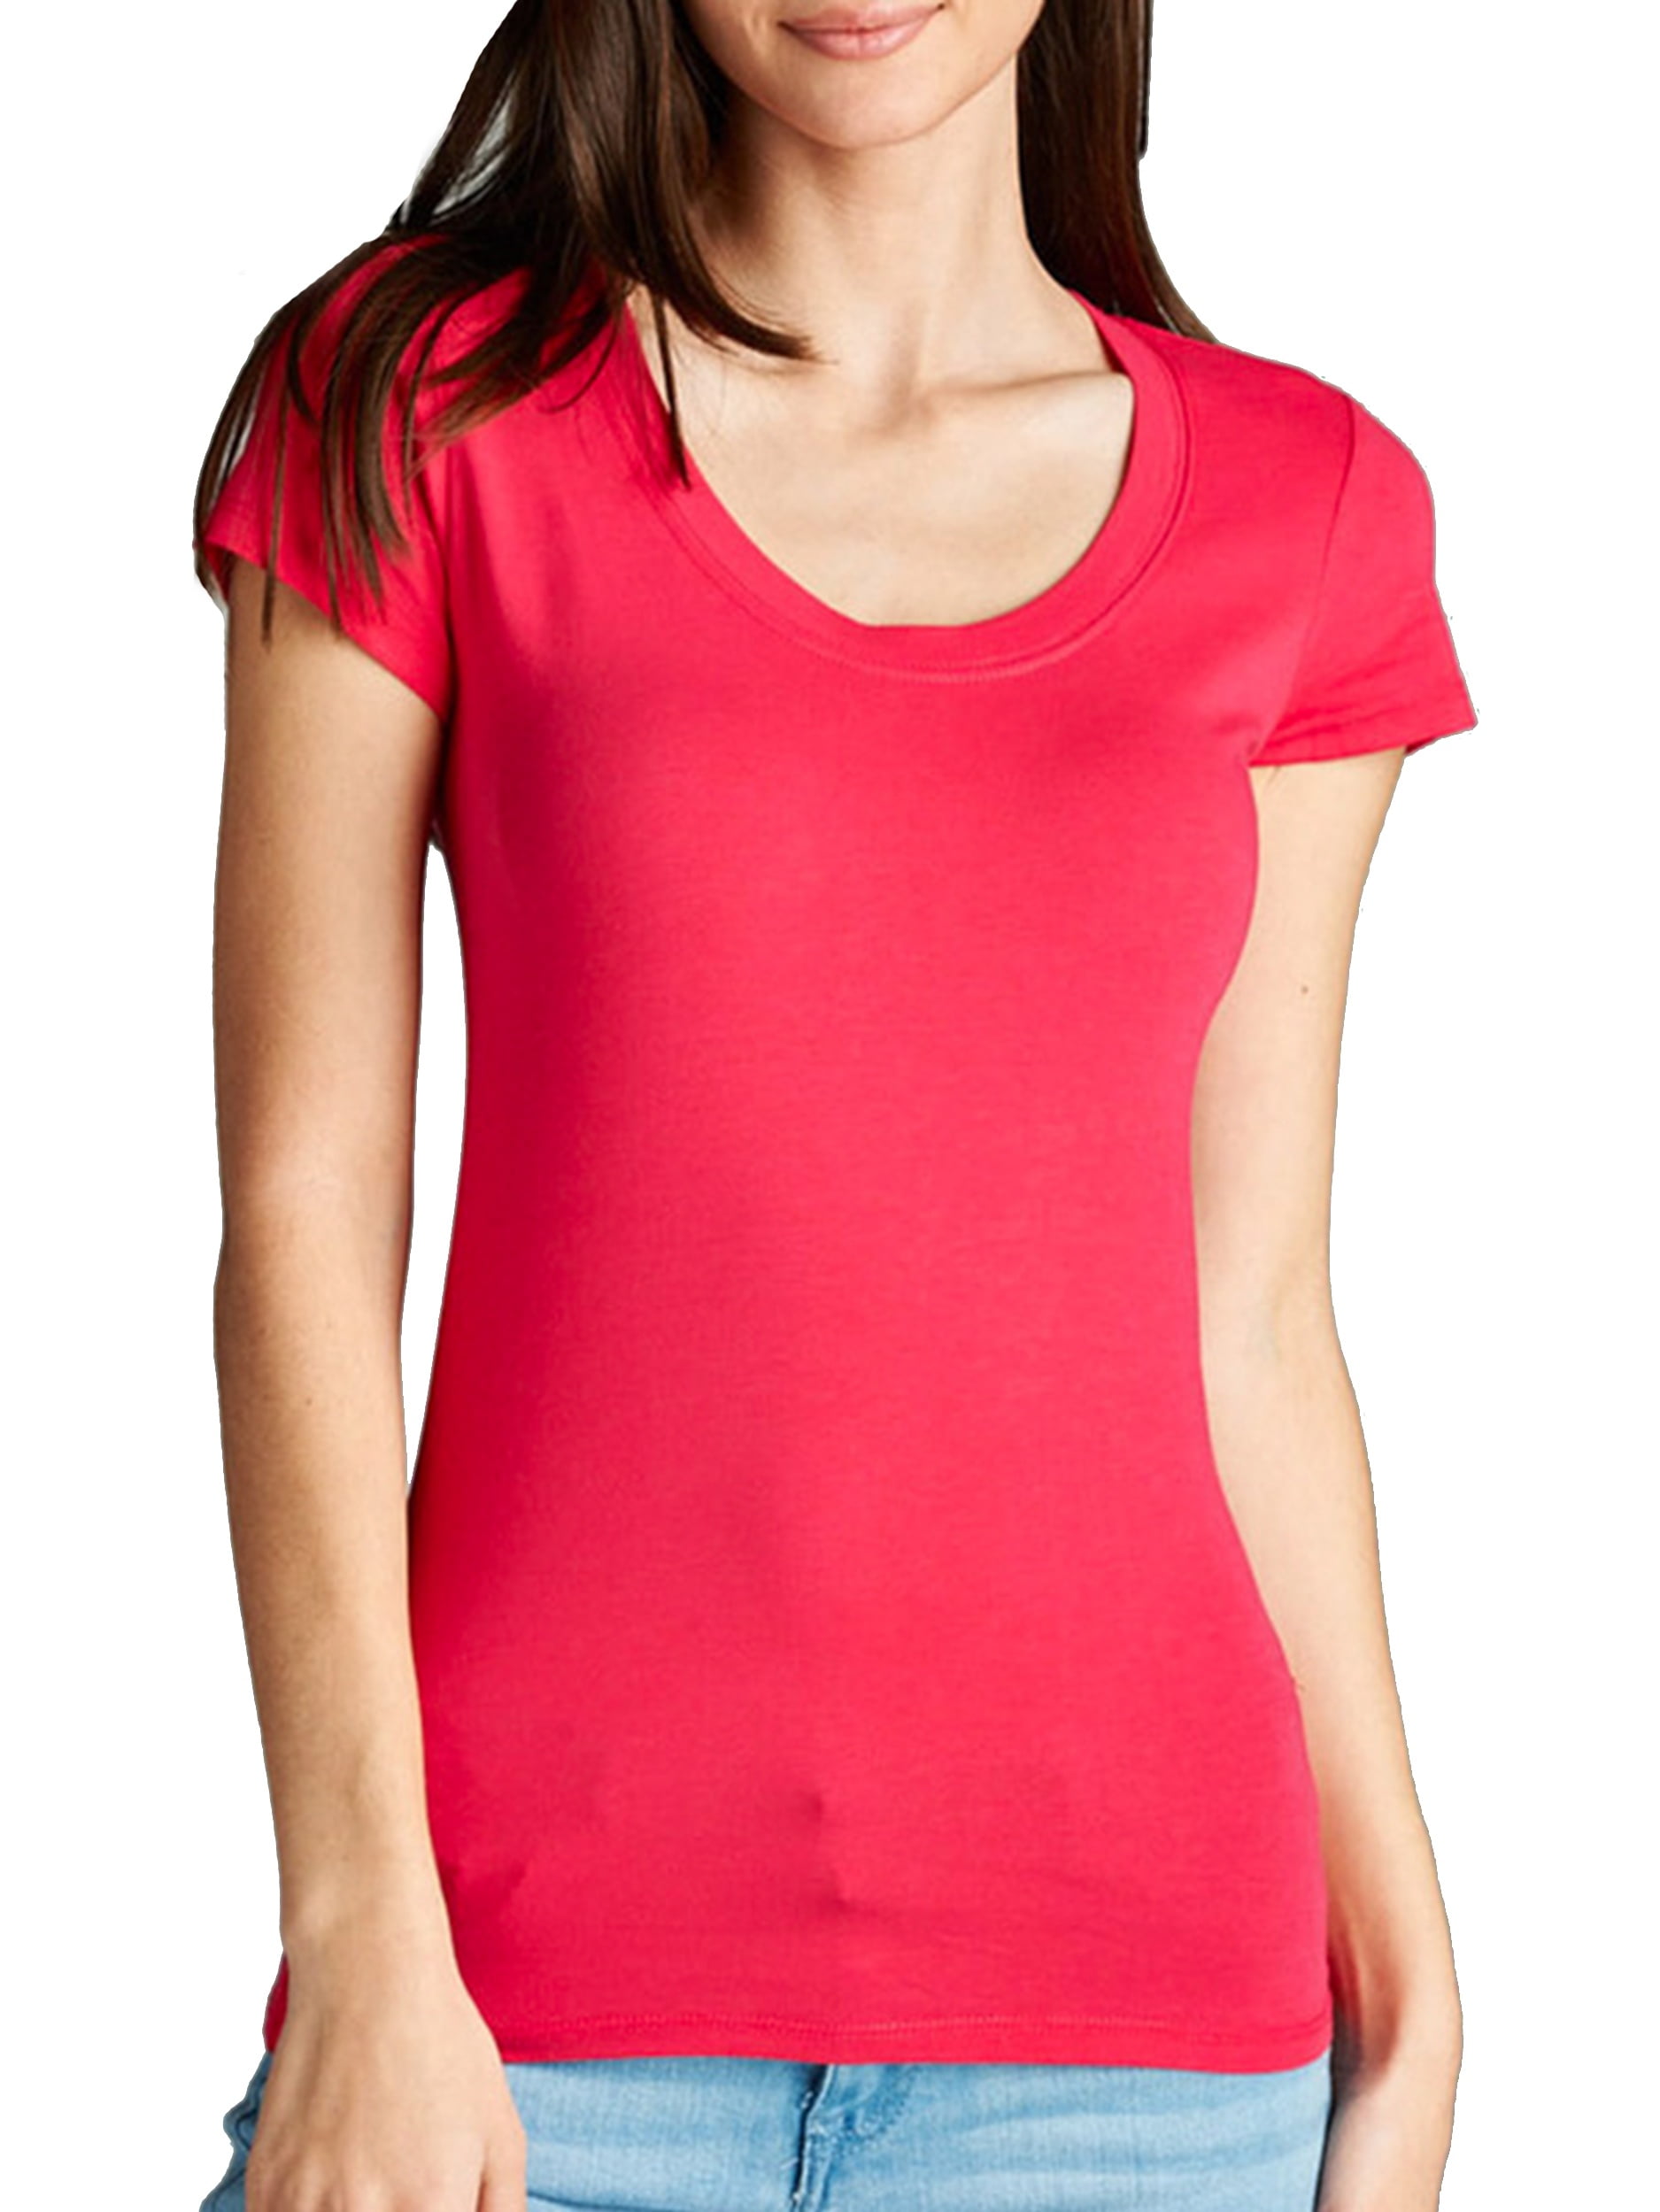 SNJ - Women's Solid Cotton Top Tee Basic Scoop Neck Short Sleeve Color ...